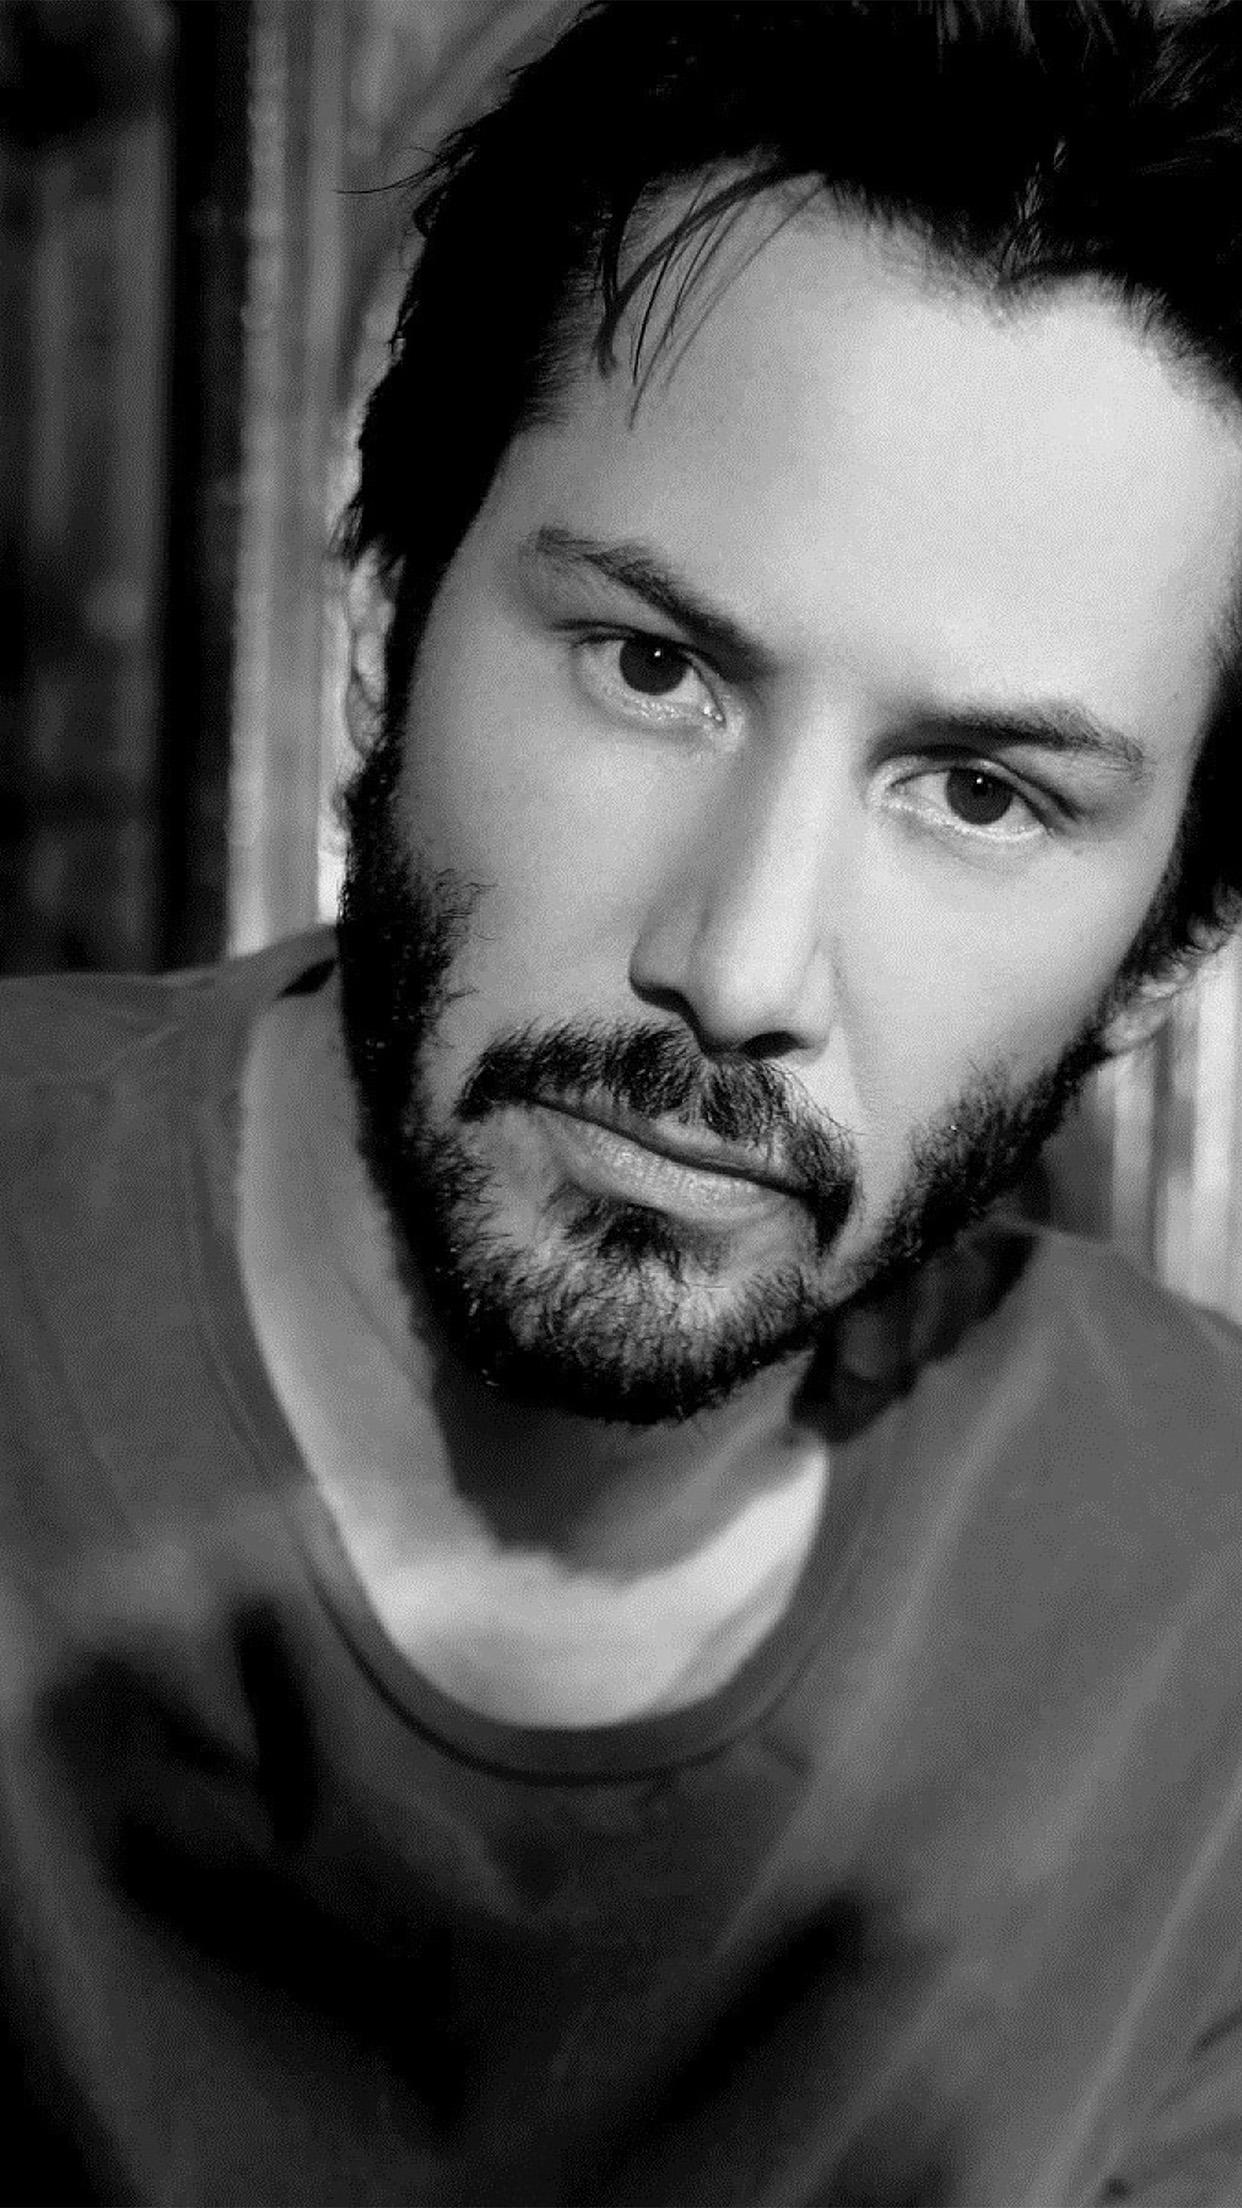 Keanu Reeves Bw Dark Actor Celebrity Android wallpaper HD